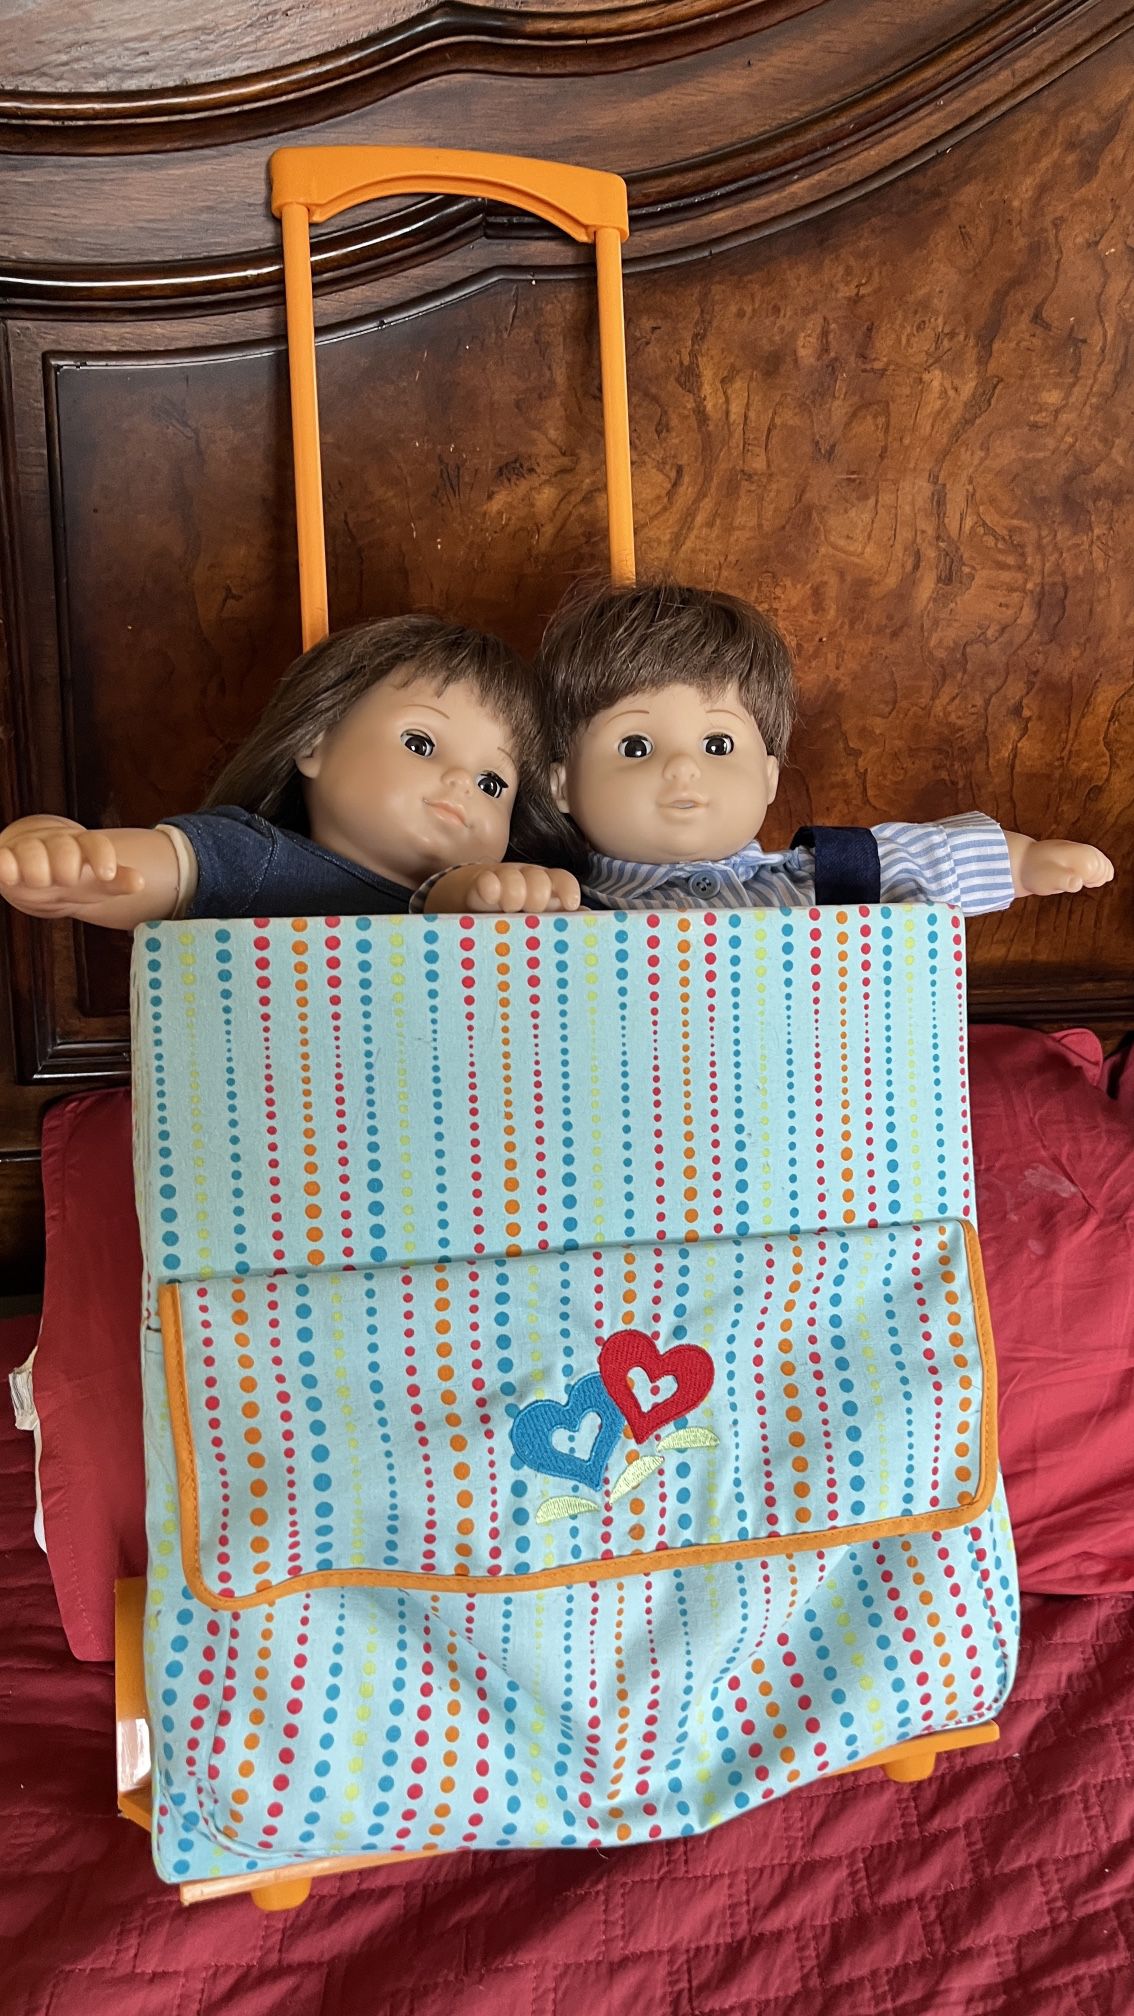 Twin Baby’s From American Girl Doll